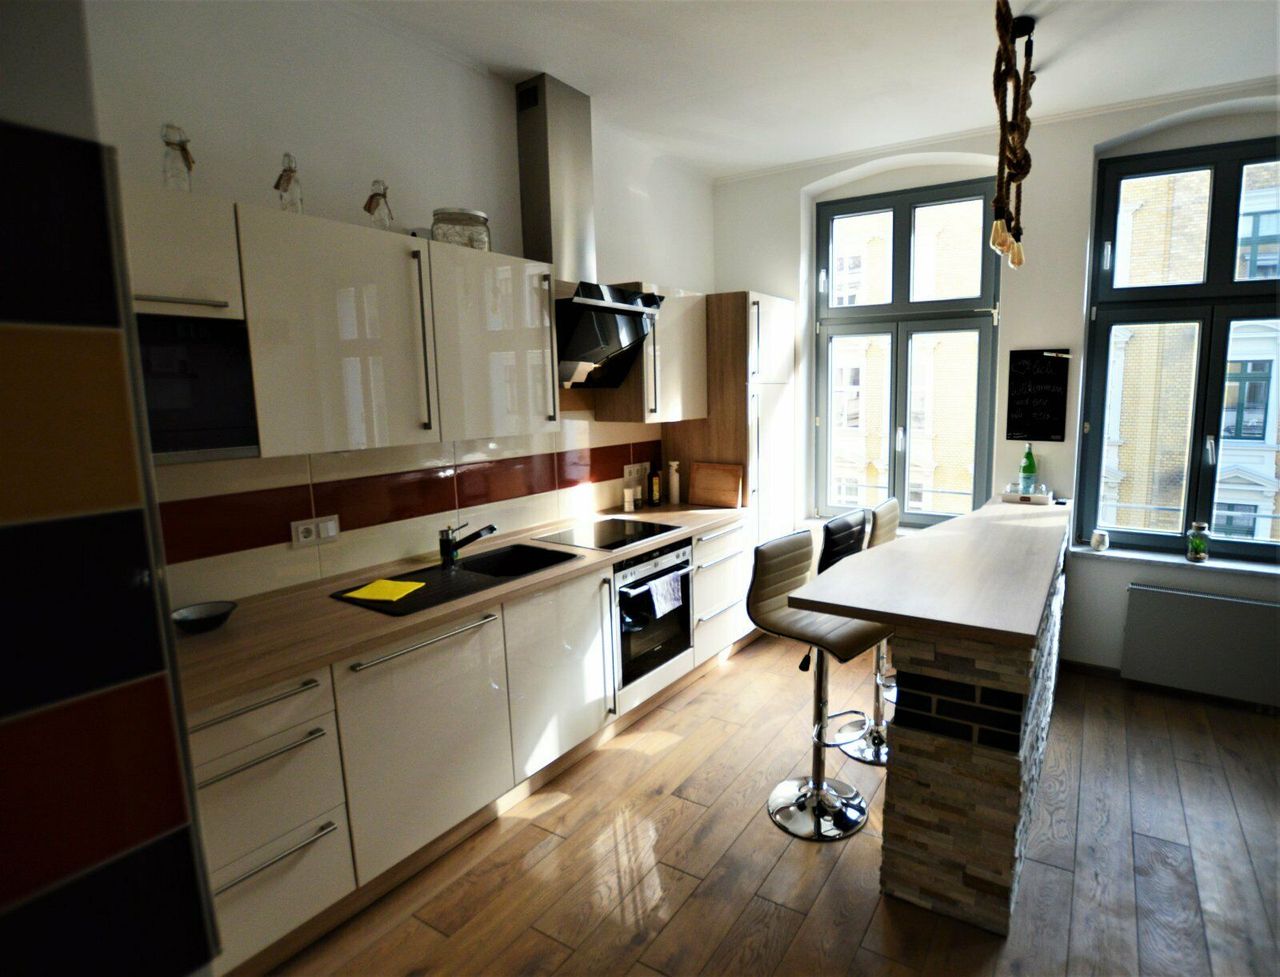 Fashionable & modern suite (Magdeburg)